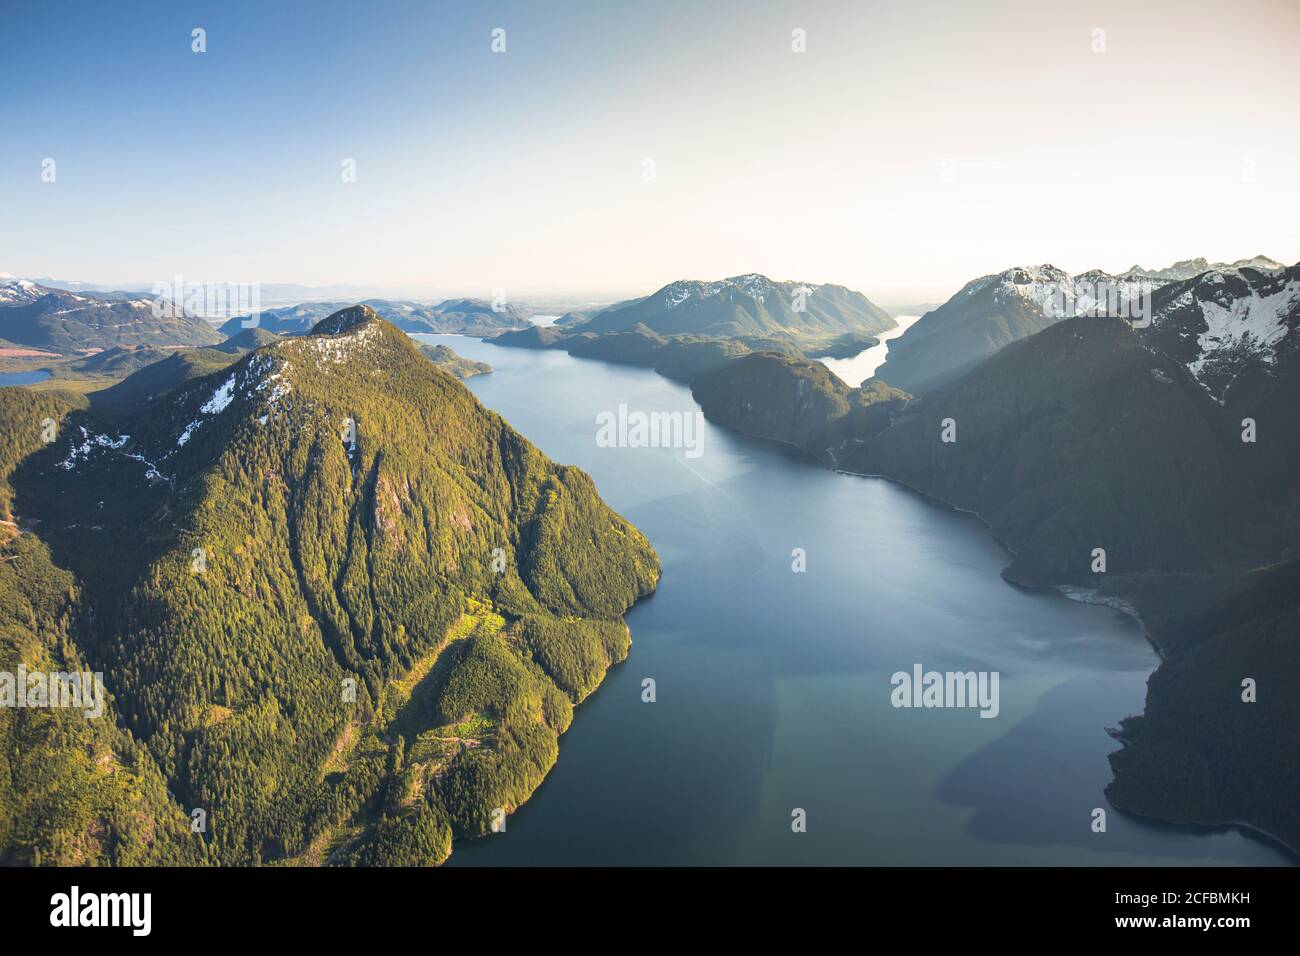 Aerial view of beautiful British Columbia, mountains, lakes, Canada. Stock Photo